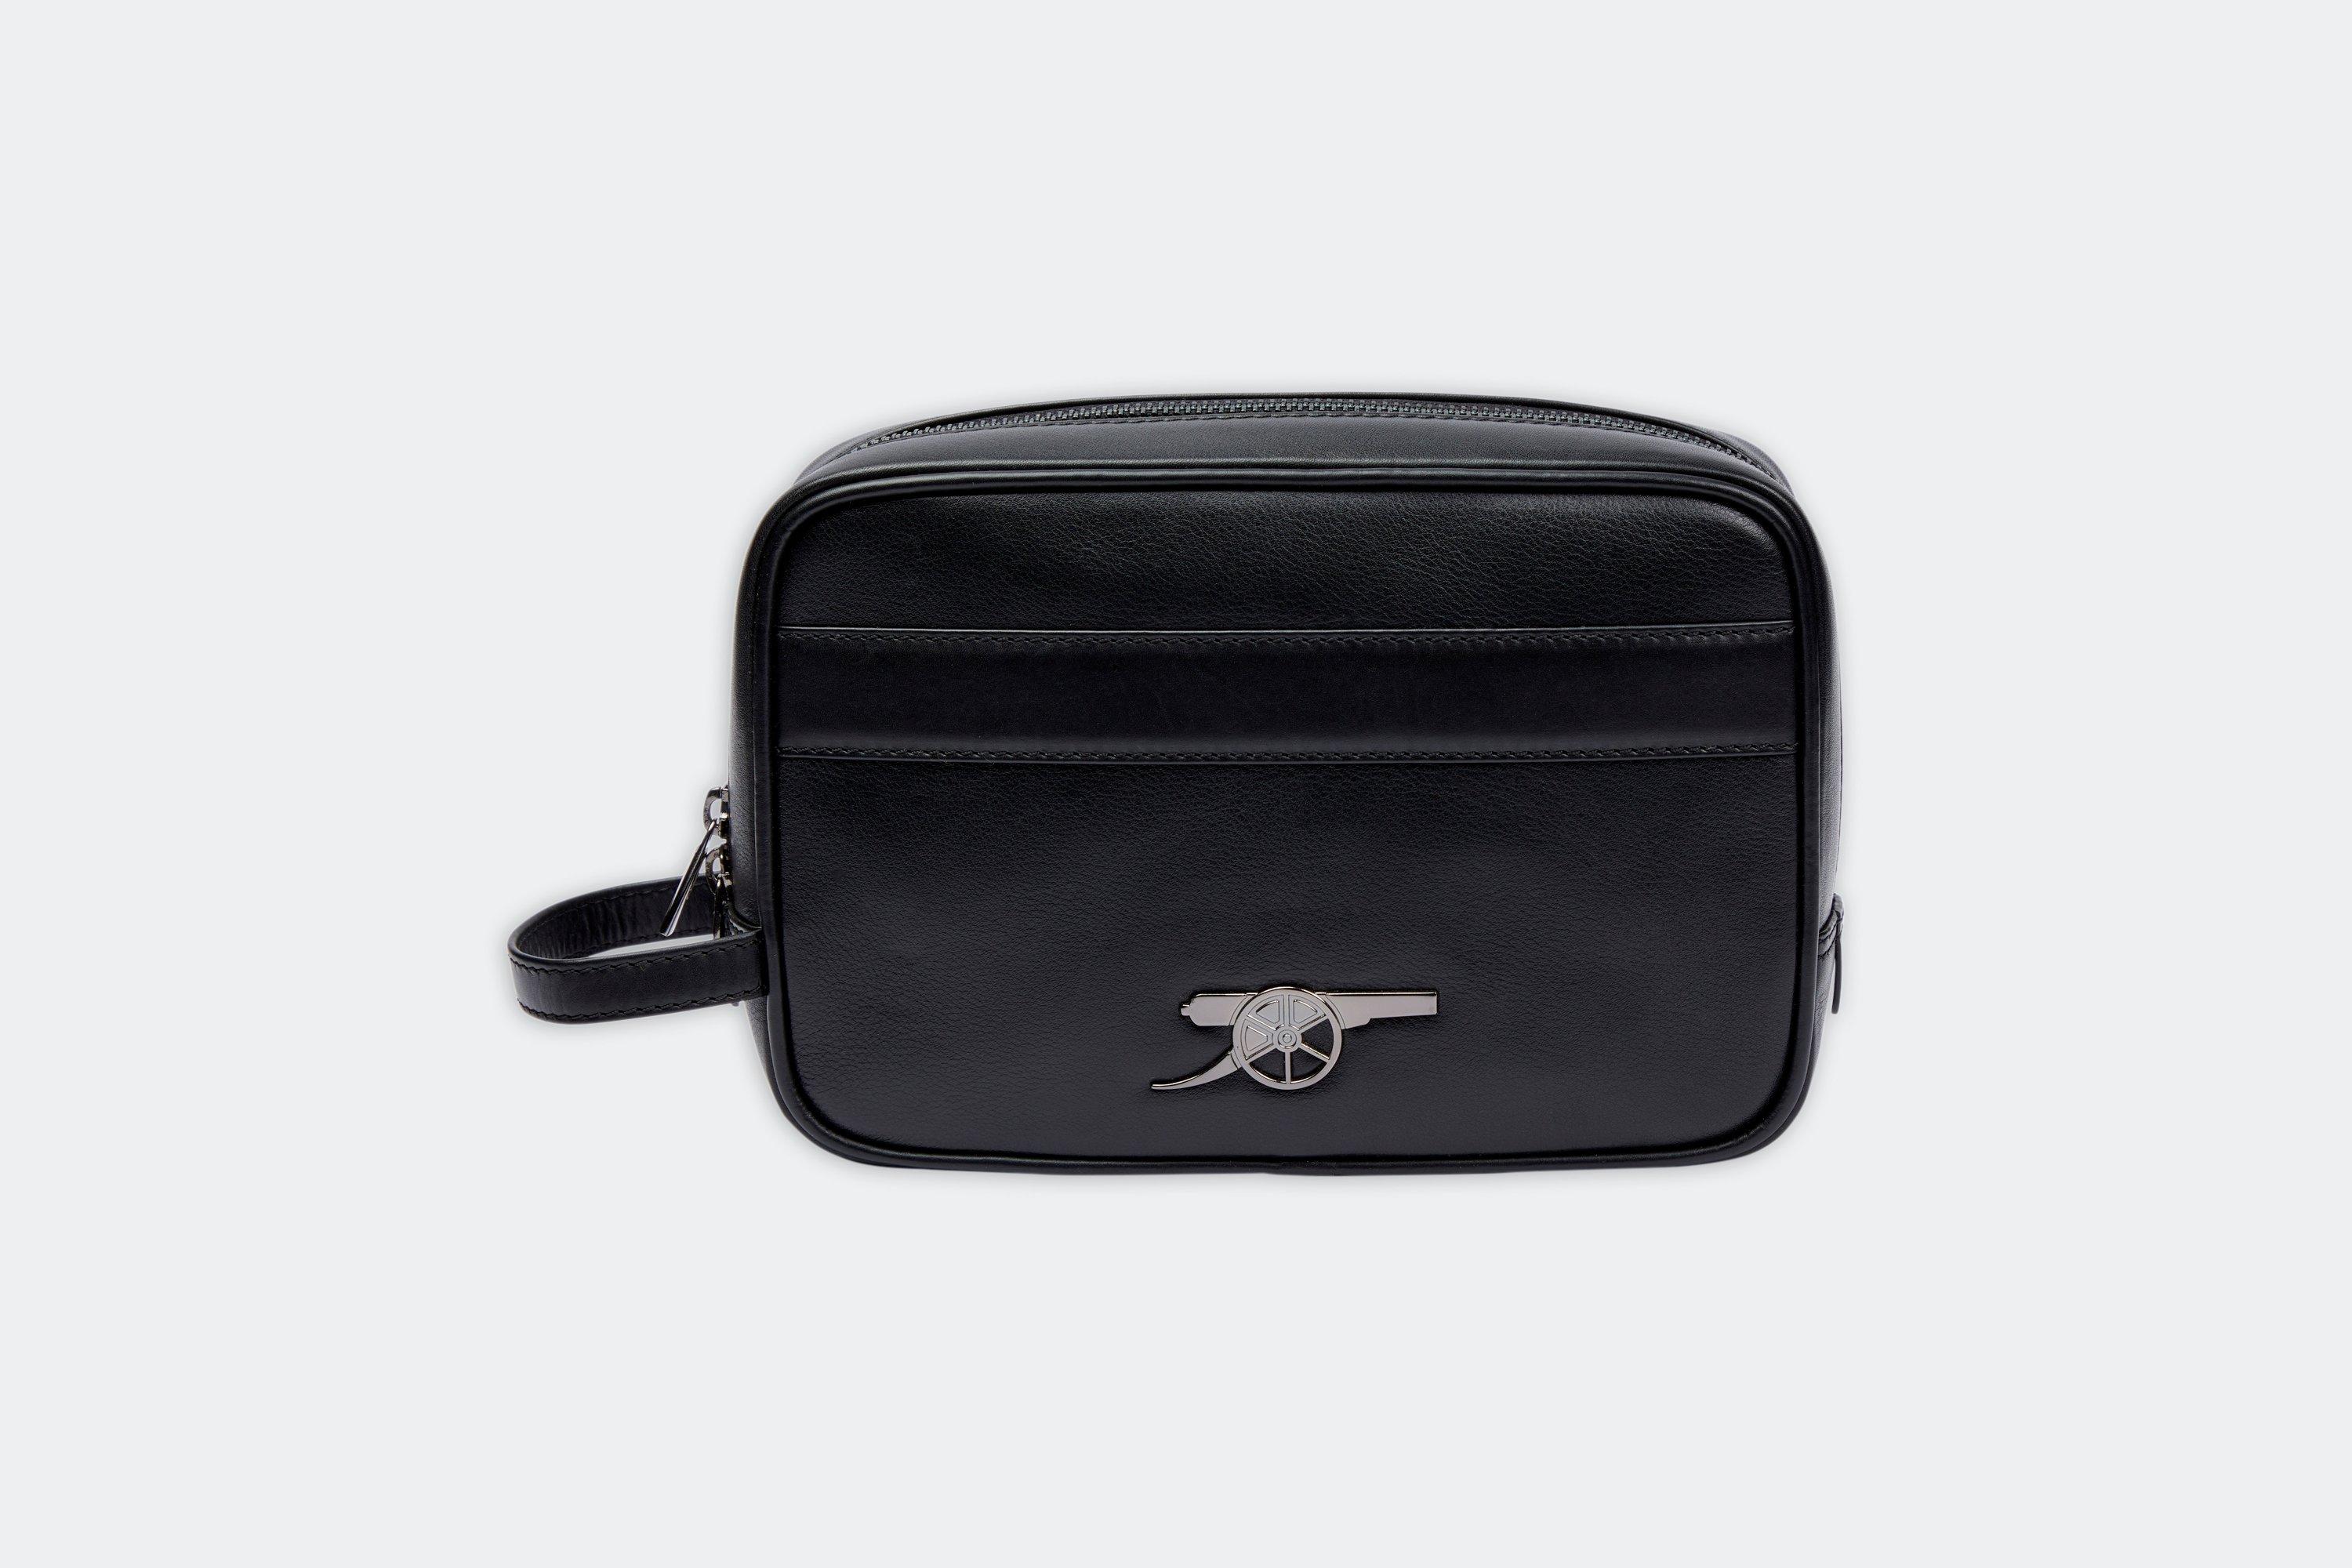 Arsenal Premium Leather Pouch